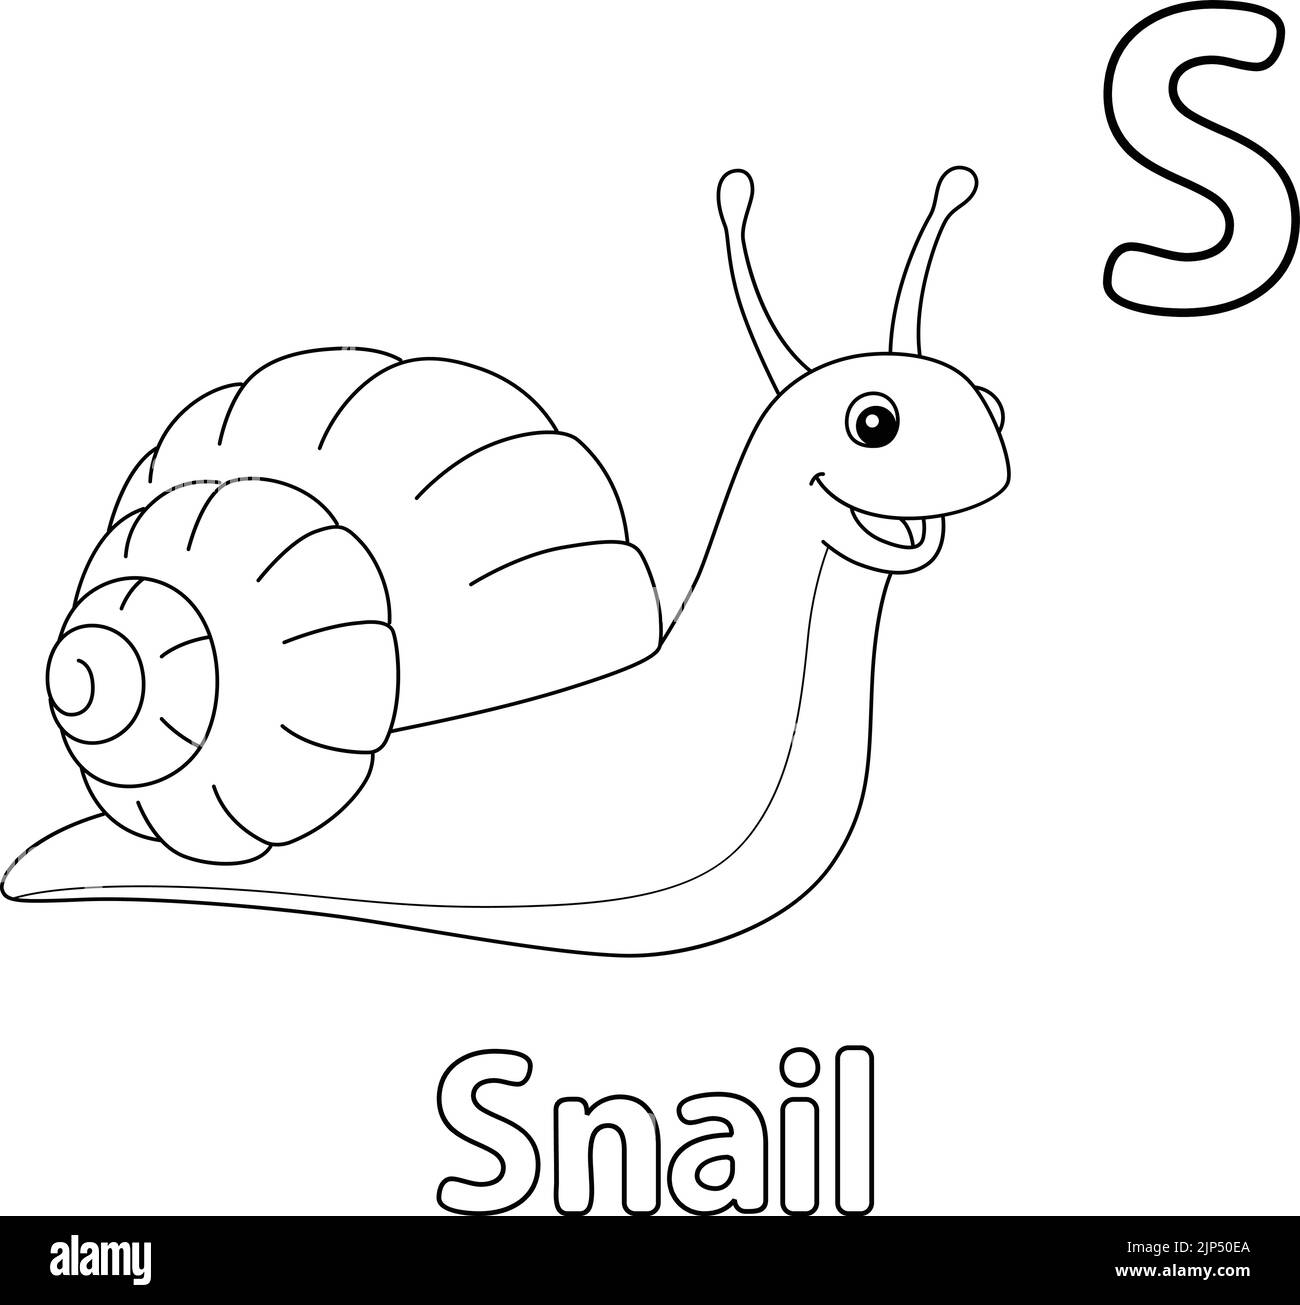 Snail Alphabet ABC Coloring Page S Stock Vector